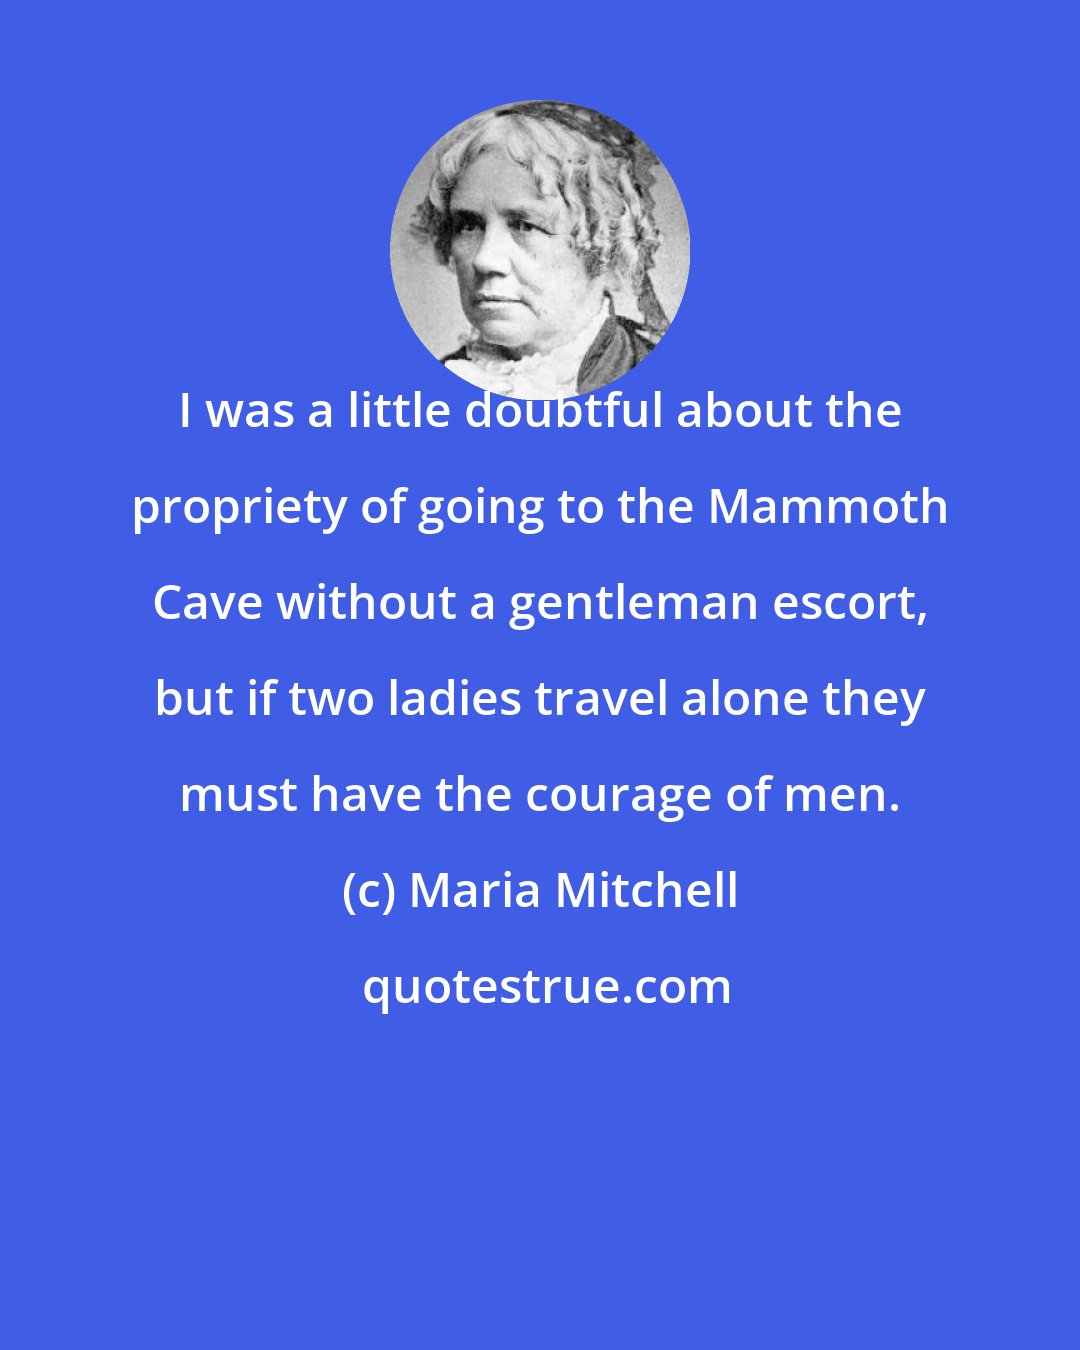 Maria Mitchell: I was a little doubtful about the propriety of going to the Mammoth Cave without a gentleman escort, but if two ladies travel alone they must have the courage of men.